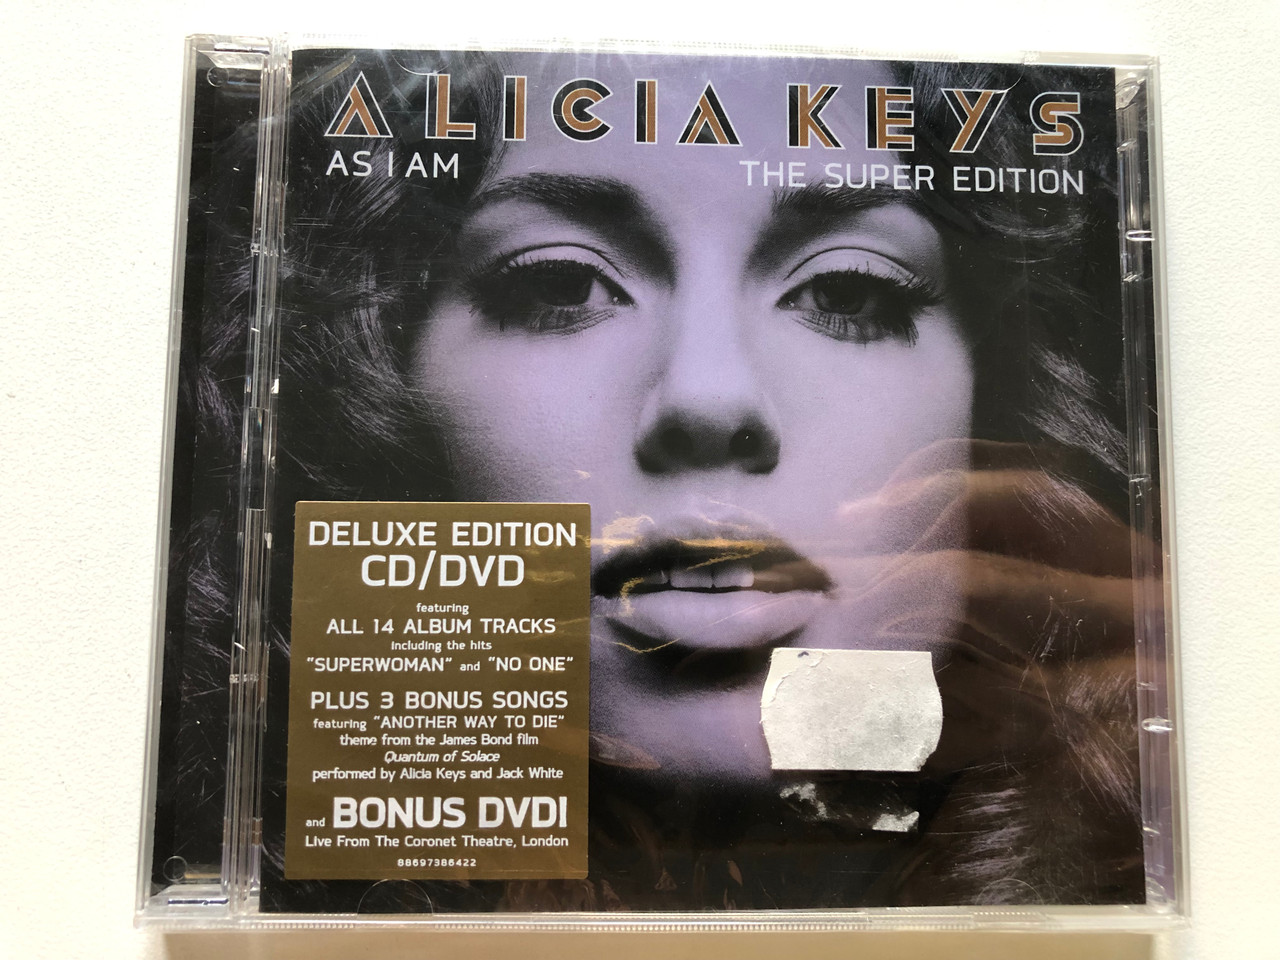 https://cdn10.bigcommerce.com/s-62bdpkt7pb/products/0/images/313968/Alicia_Keys_As_I_Am_The_Super_Edition_Deluxe_Edition_CDDVD_featuring_All_14_Album_Tracks_including_the_hits_Superwoman_and_No_One._Plus_3_Bonus_Songs_featuring_Another_Way_T_1__24871.1701198920.1280.1280.JPG?c=2